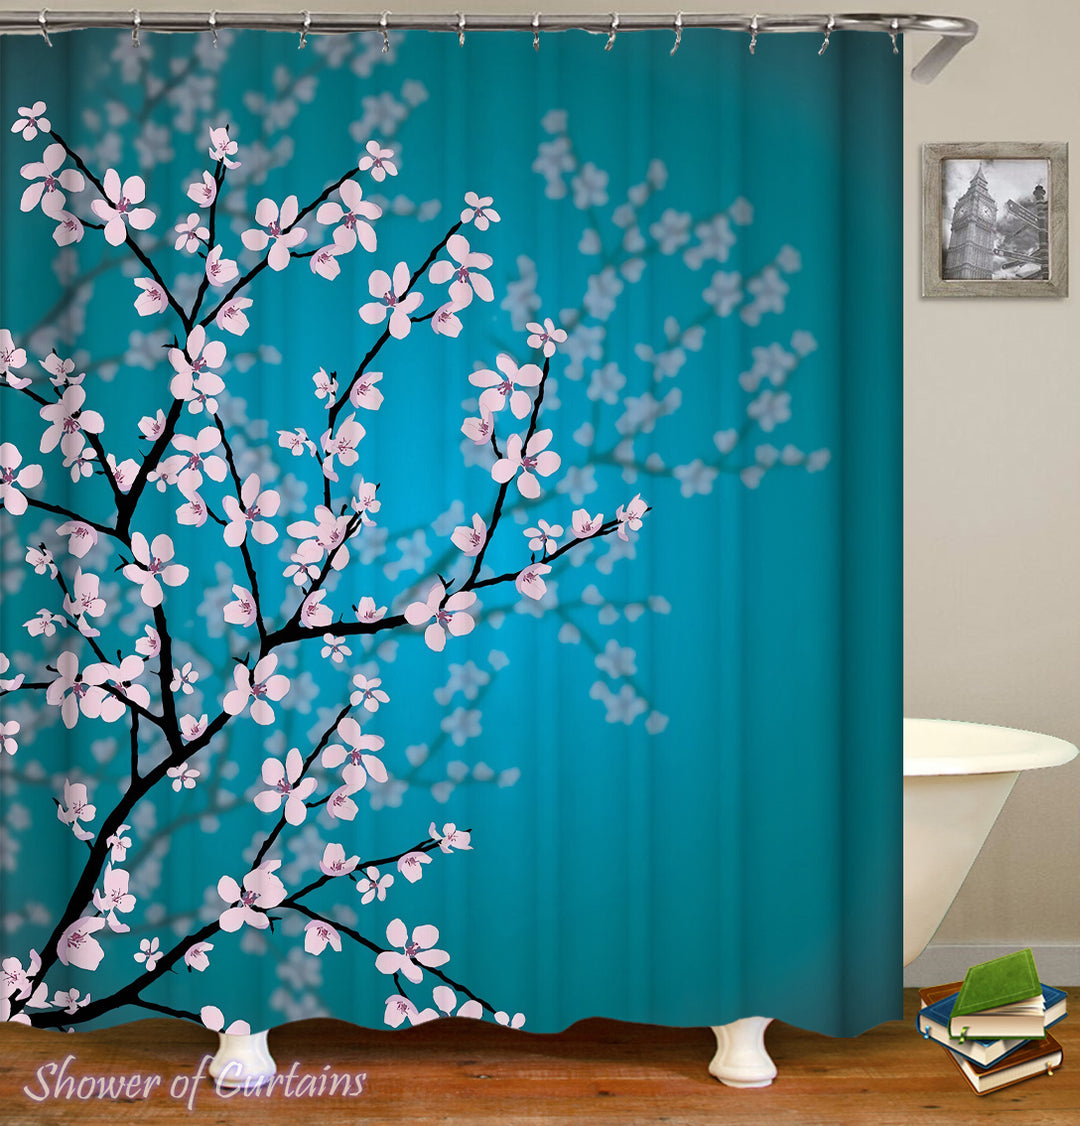 Cherry Blossom shower curtain- Cherry Blossom Over The Turquoise